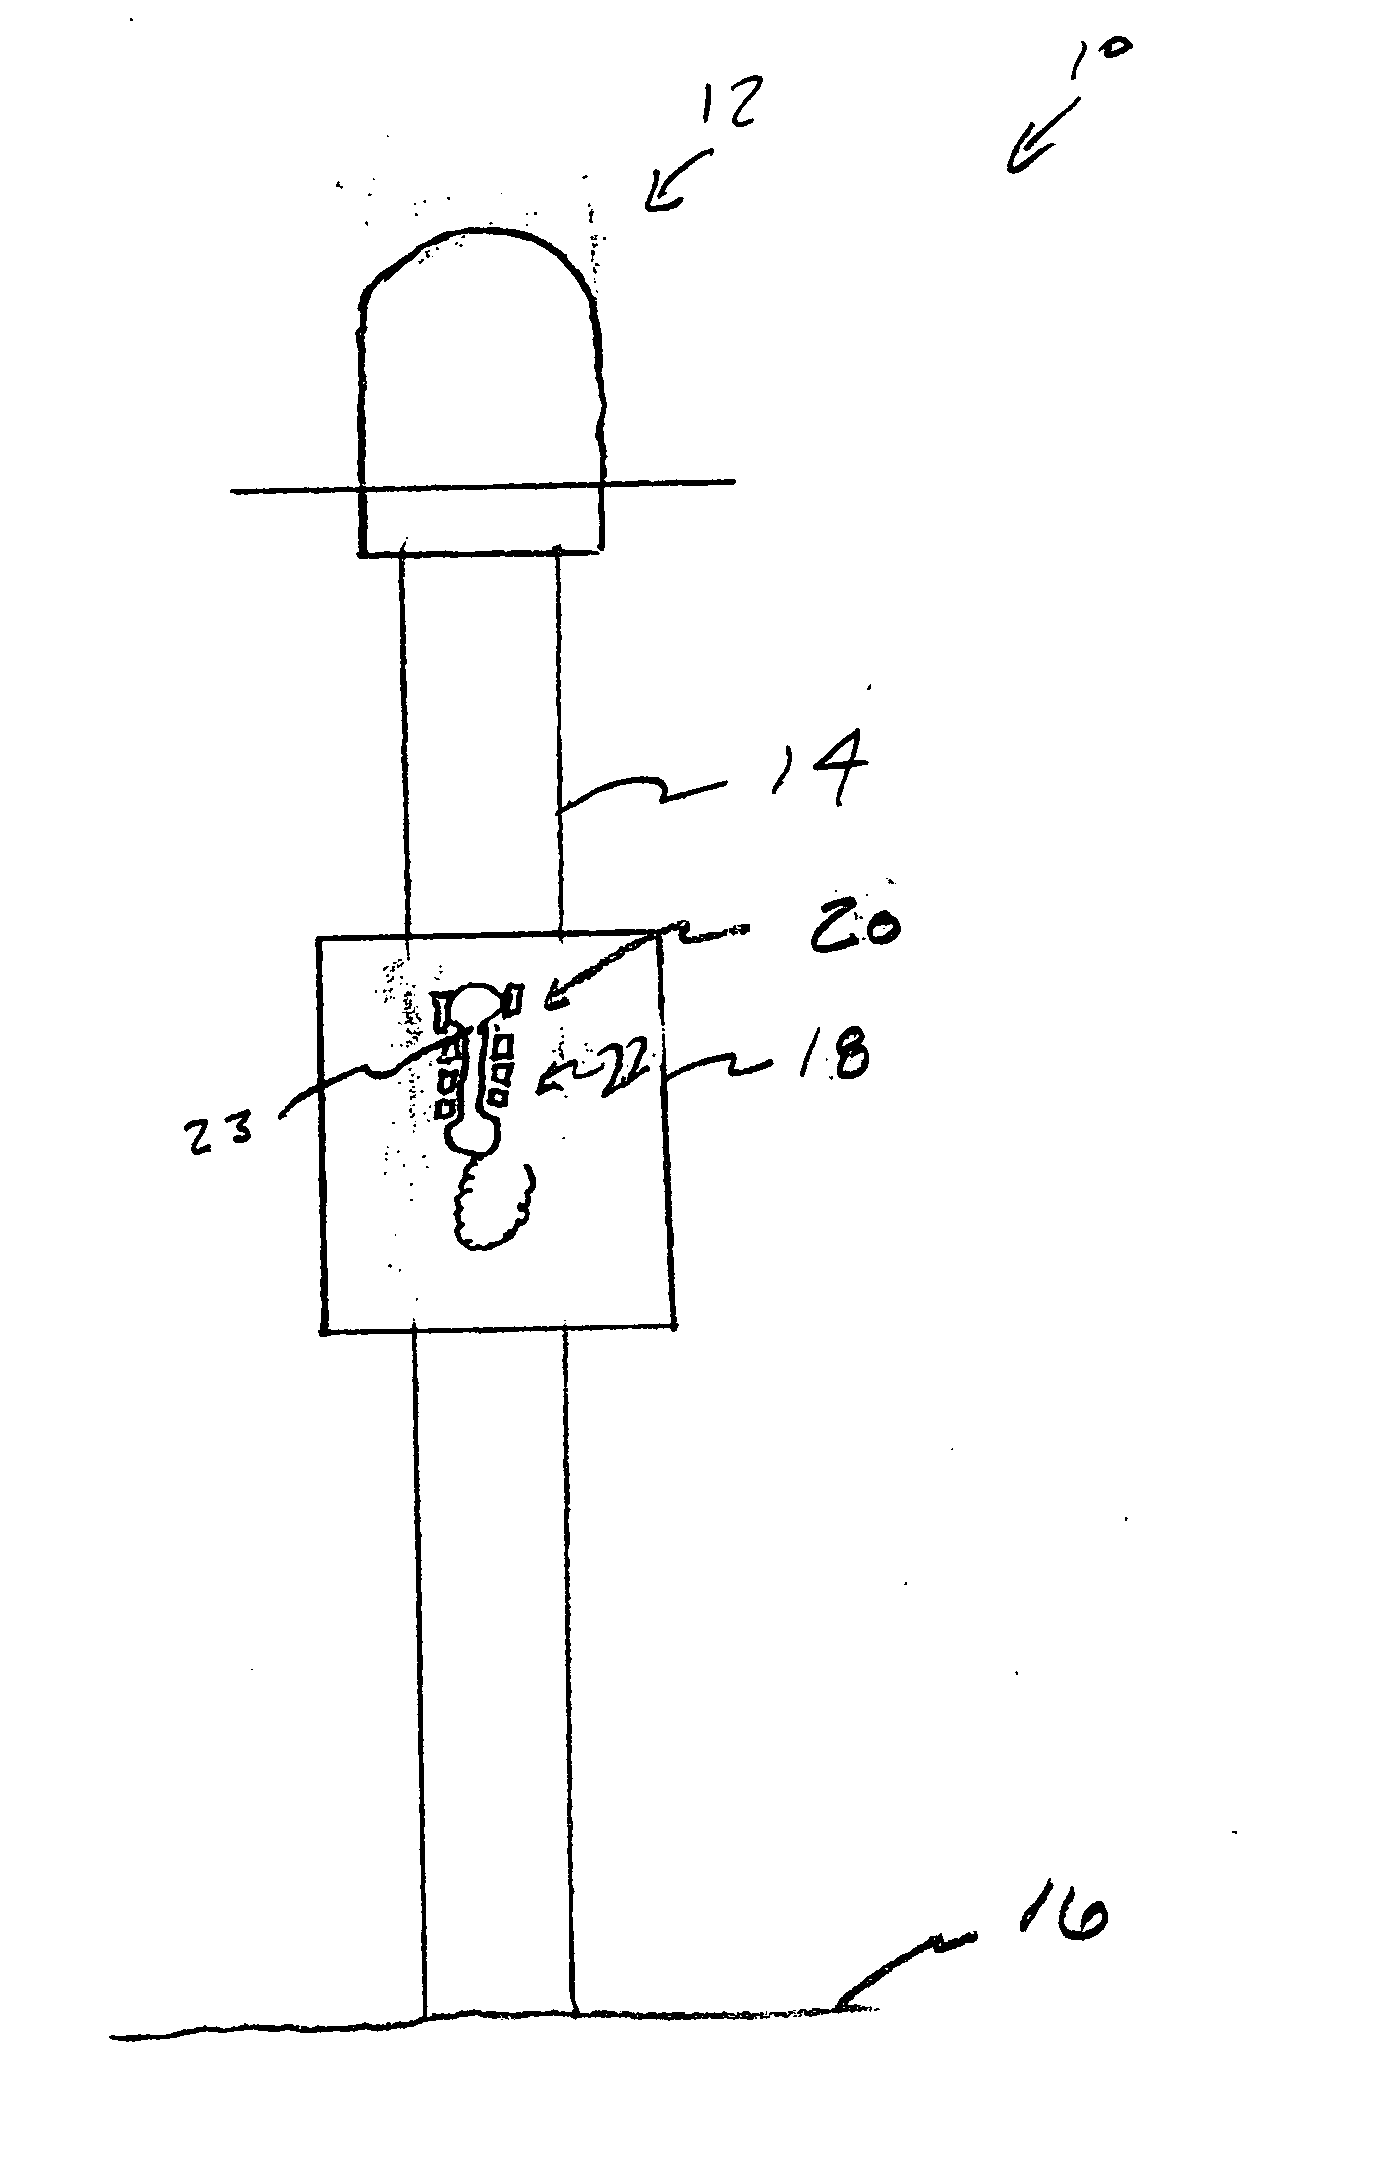 Ambient light sensing solar powered pulsed LED visual indicator apparatus and method